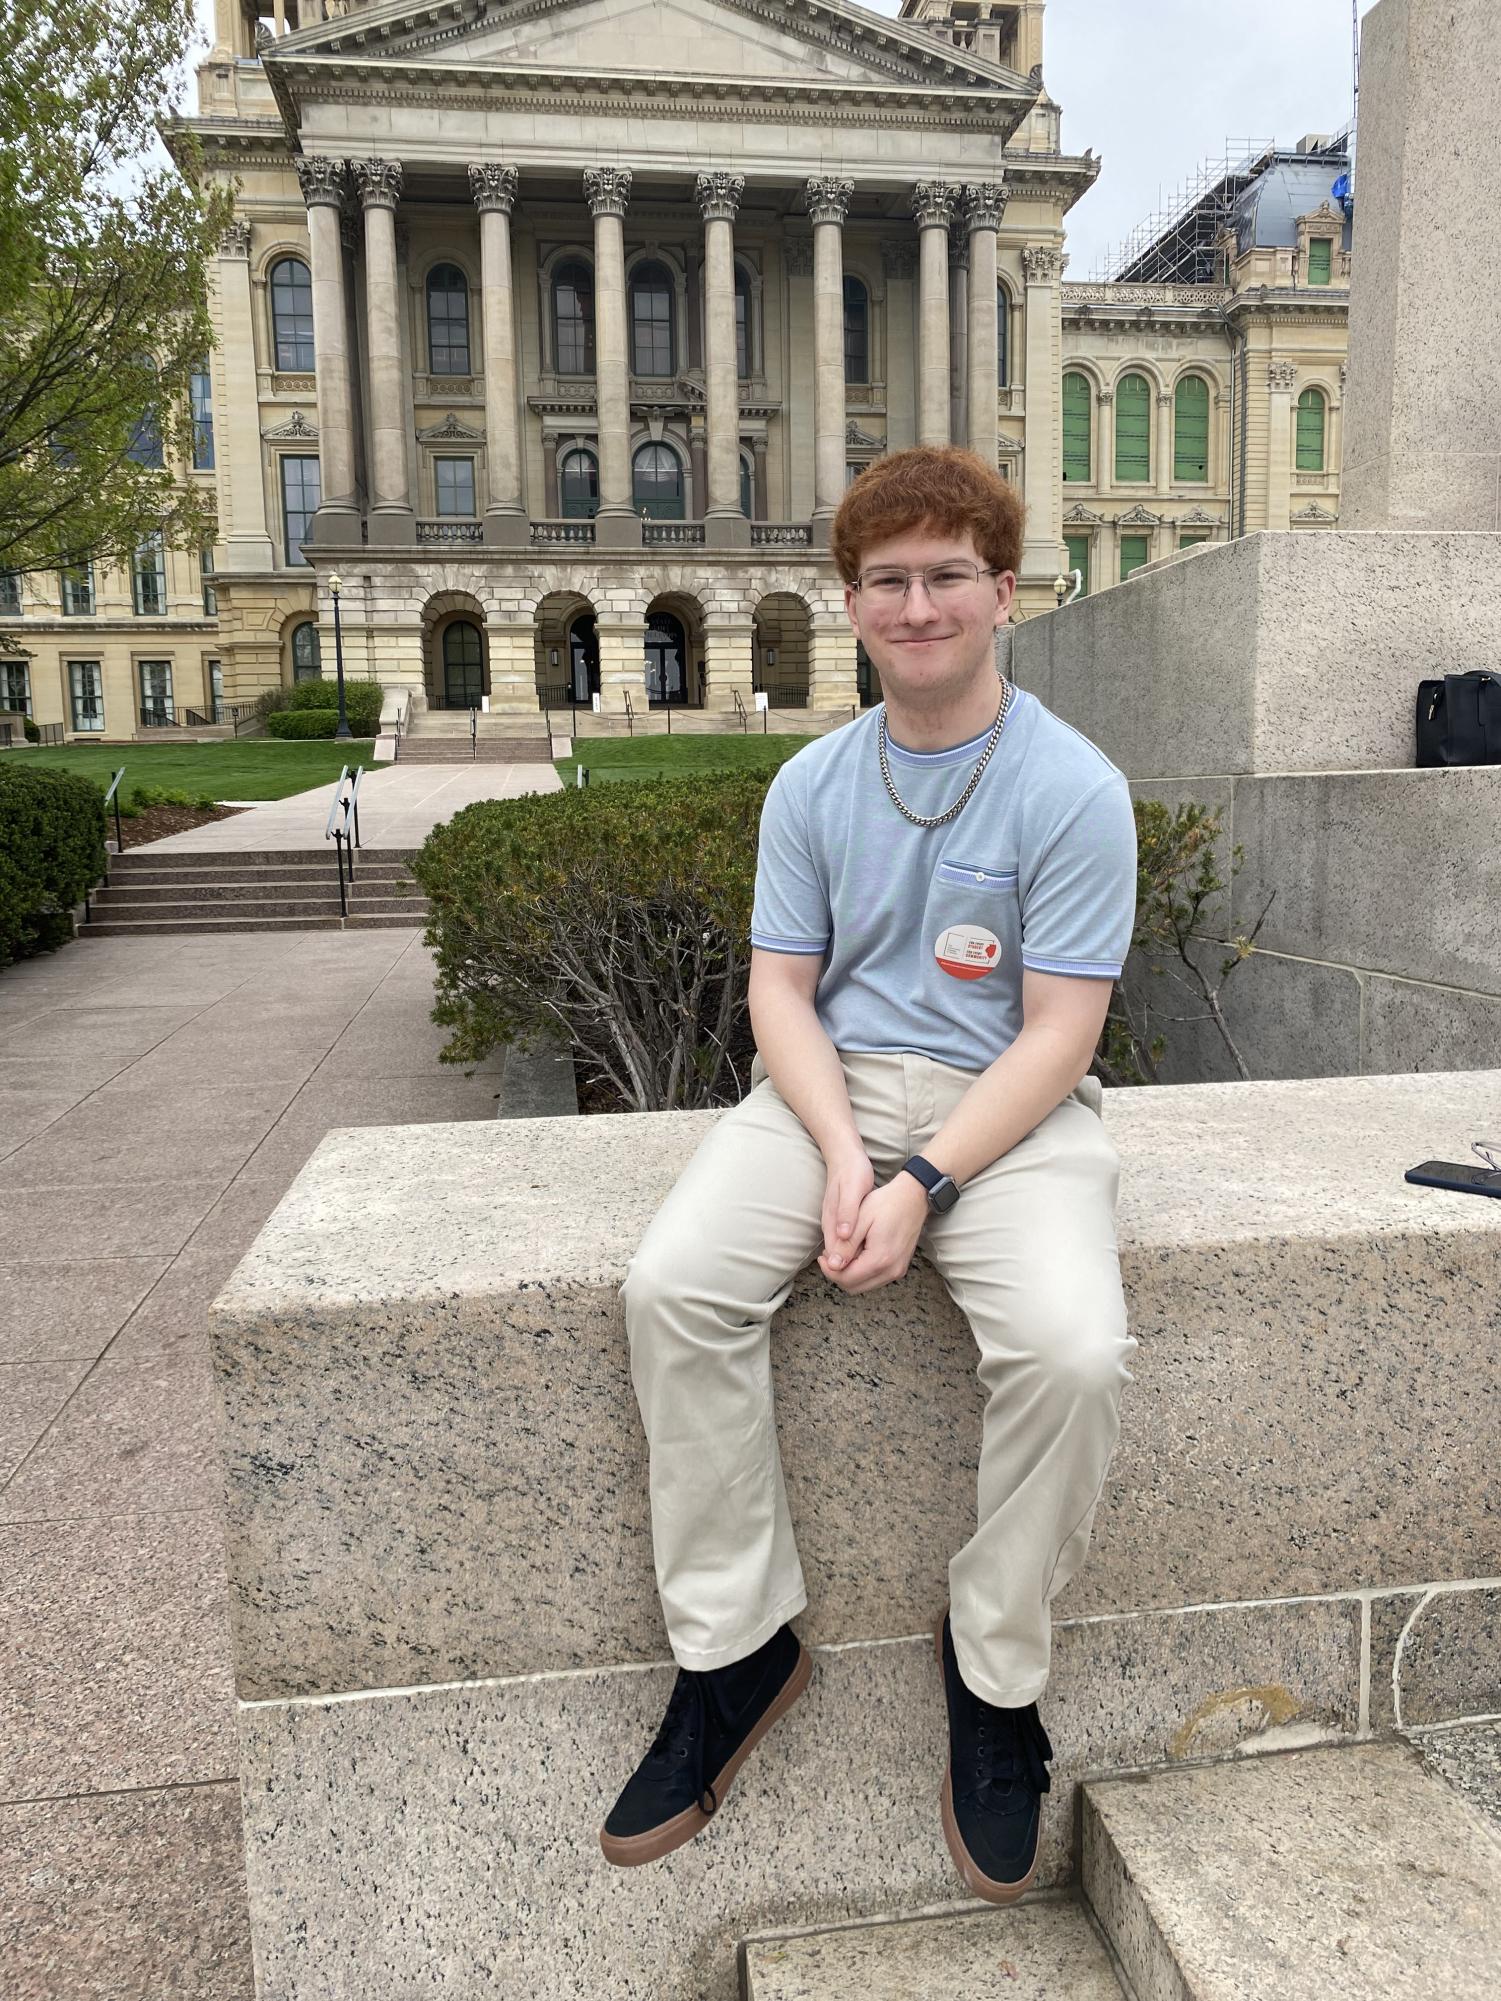 Robert, sitting in front of the Illinois State Capital, back in Apr. Photo provided by Robert Morse.